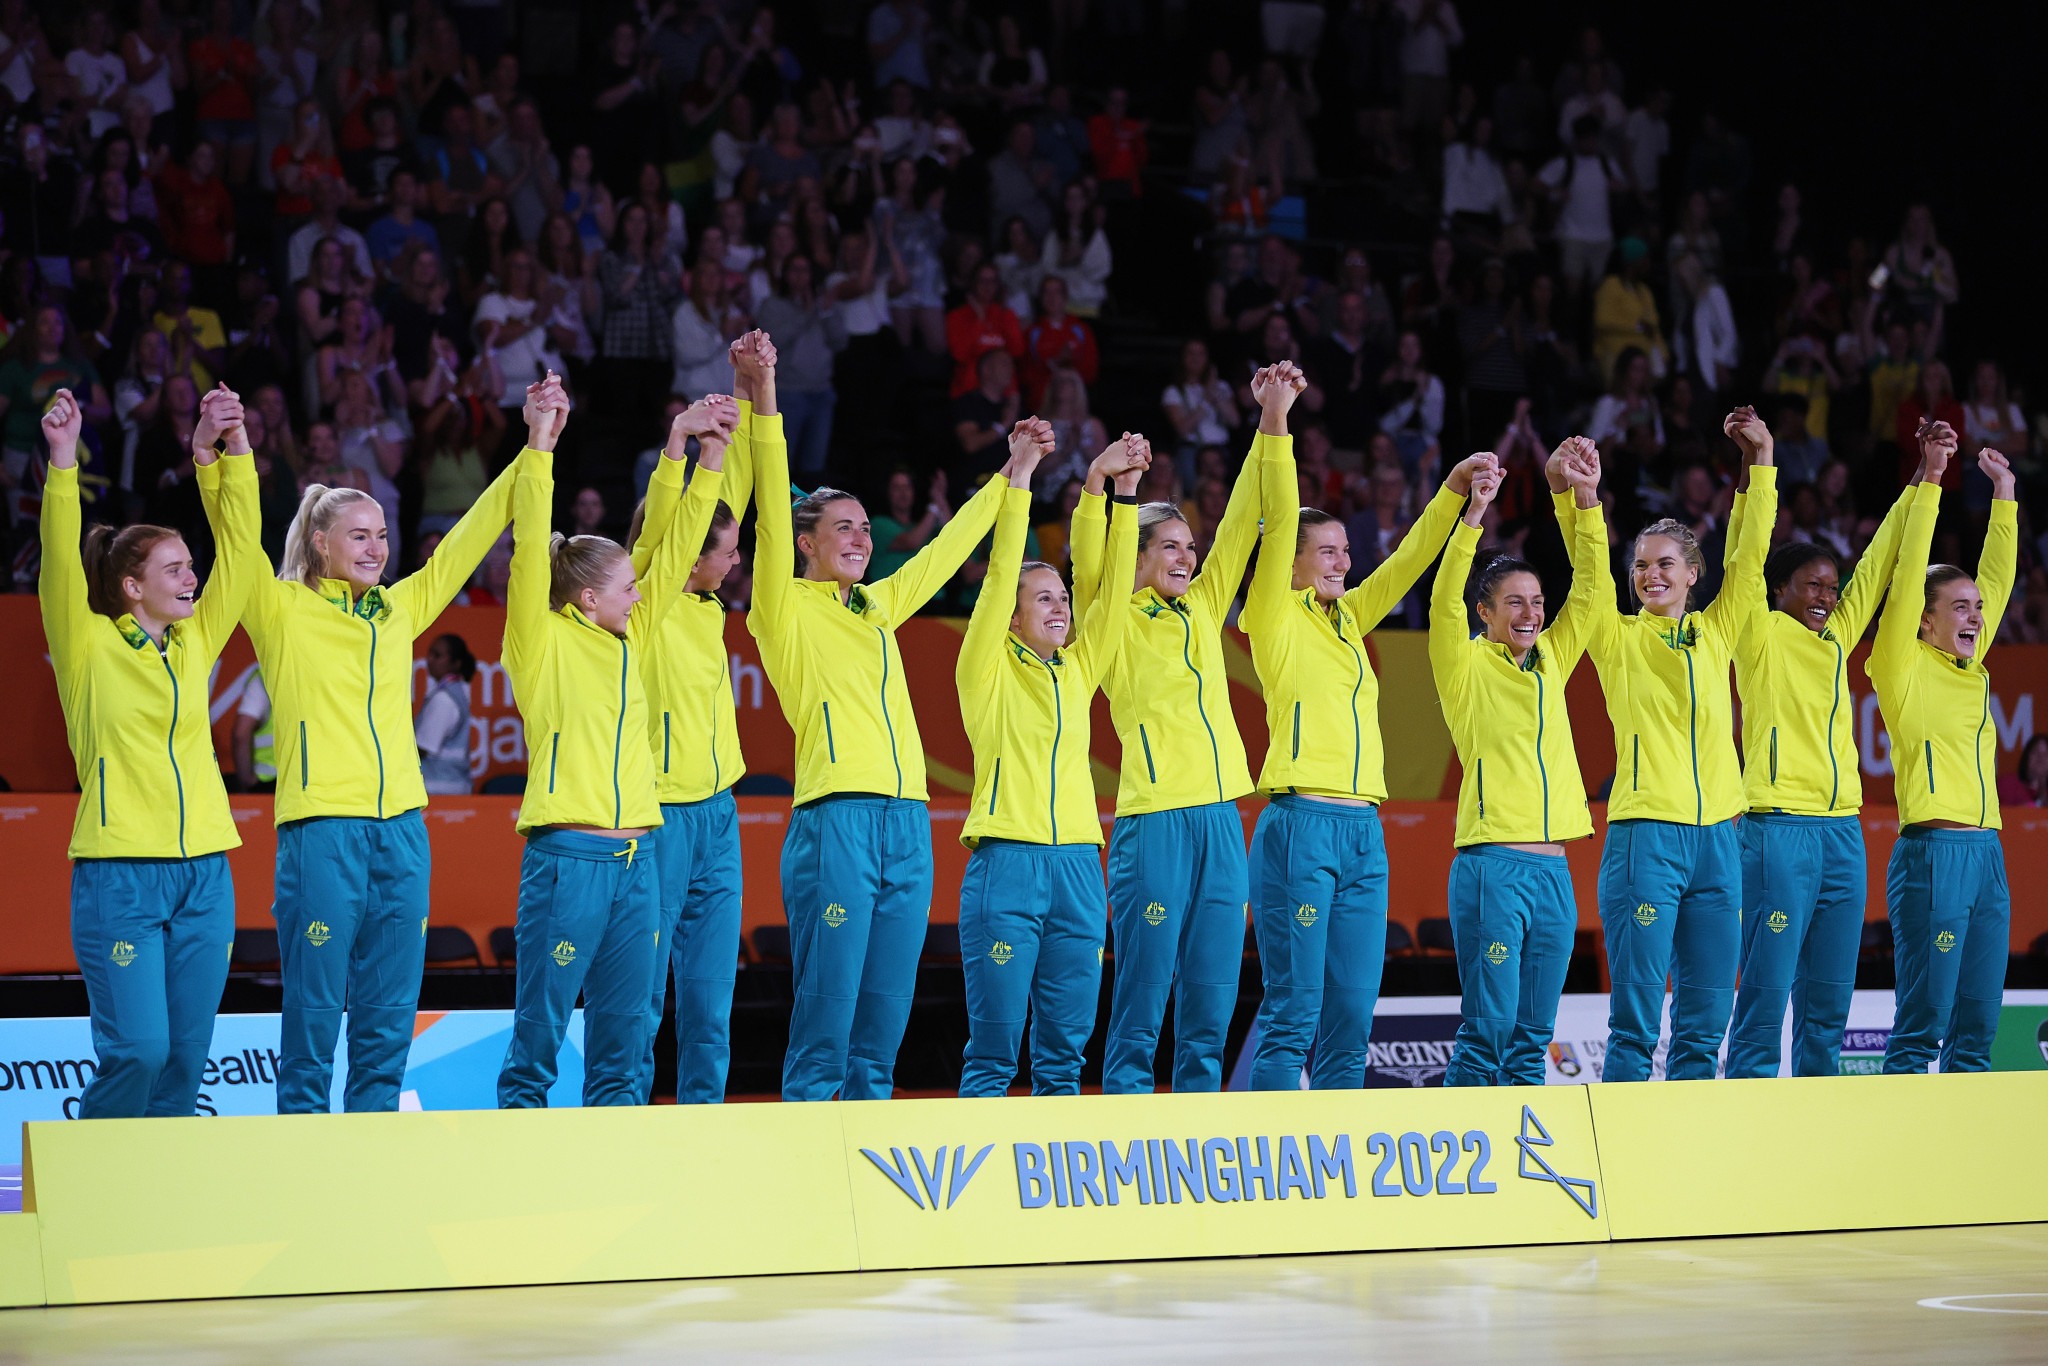 Australia topped the medals table at Birmingham 2022 with 67 gold medals ©Getty Images